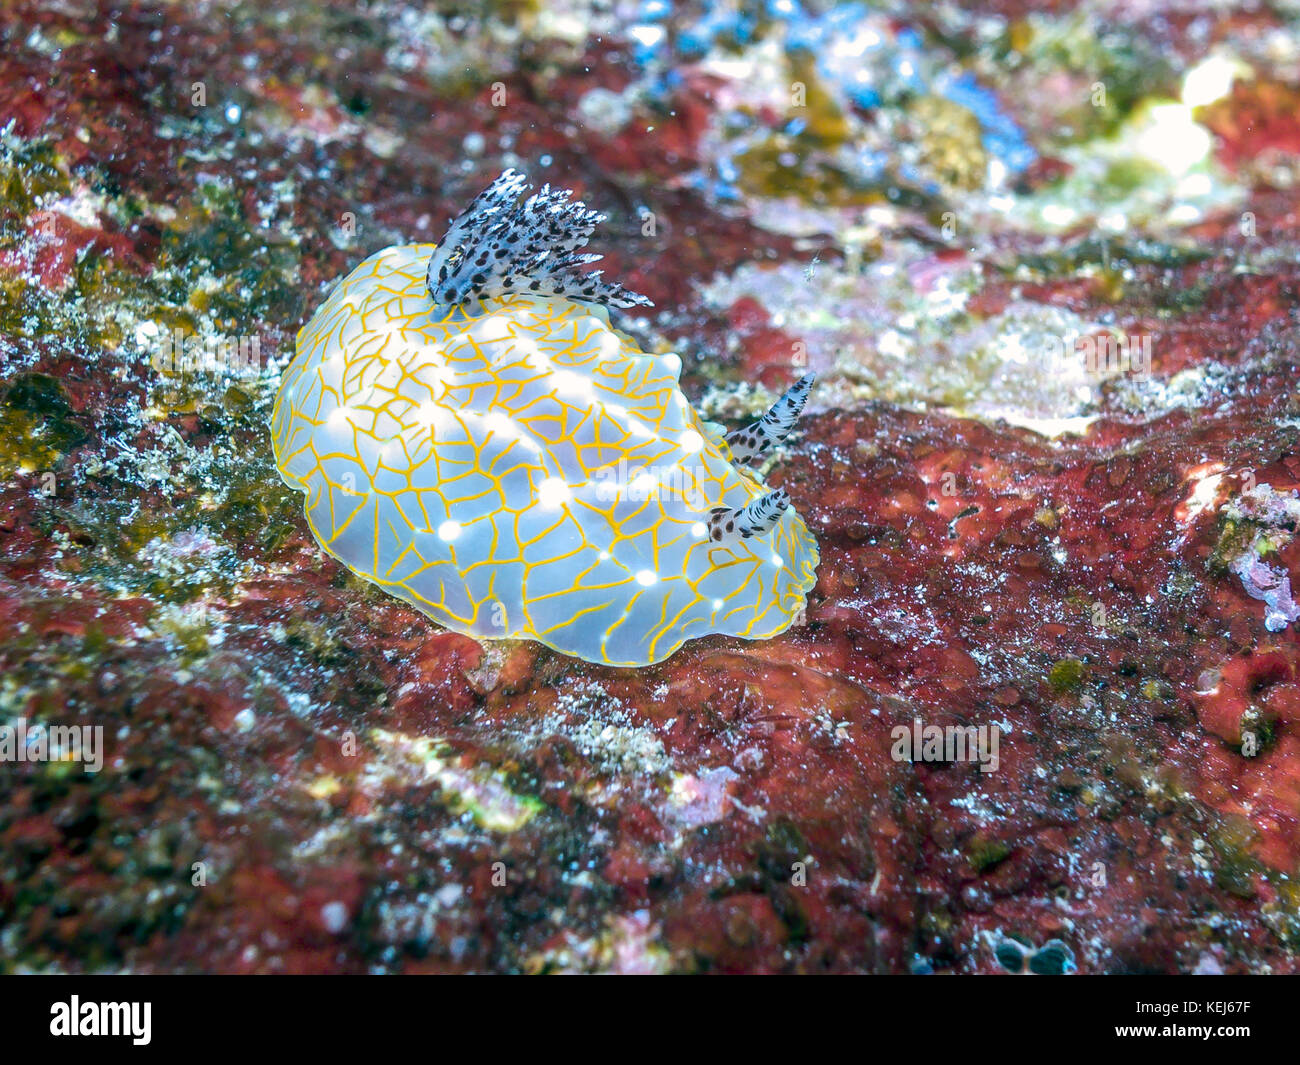 Nudibranchs, sea slugs and are members of the class Gastropoda in the phylum Mollusca Stock Photo